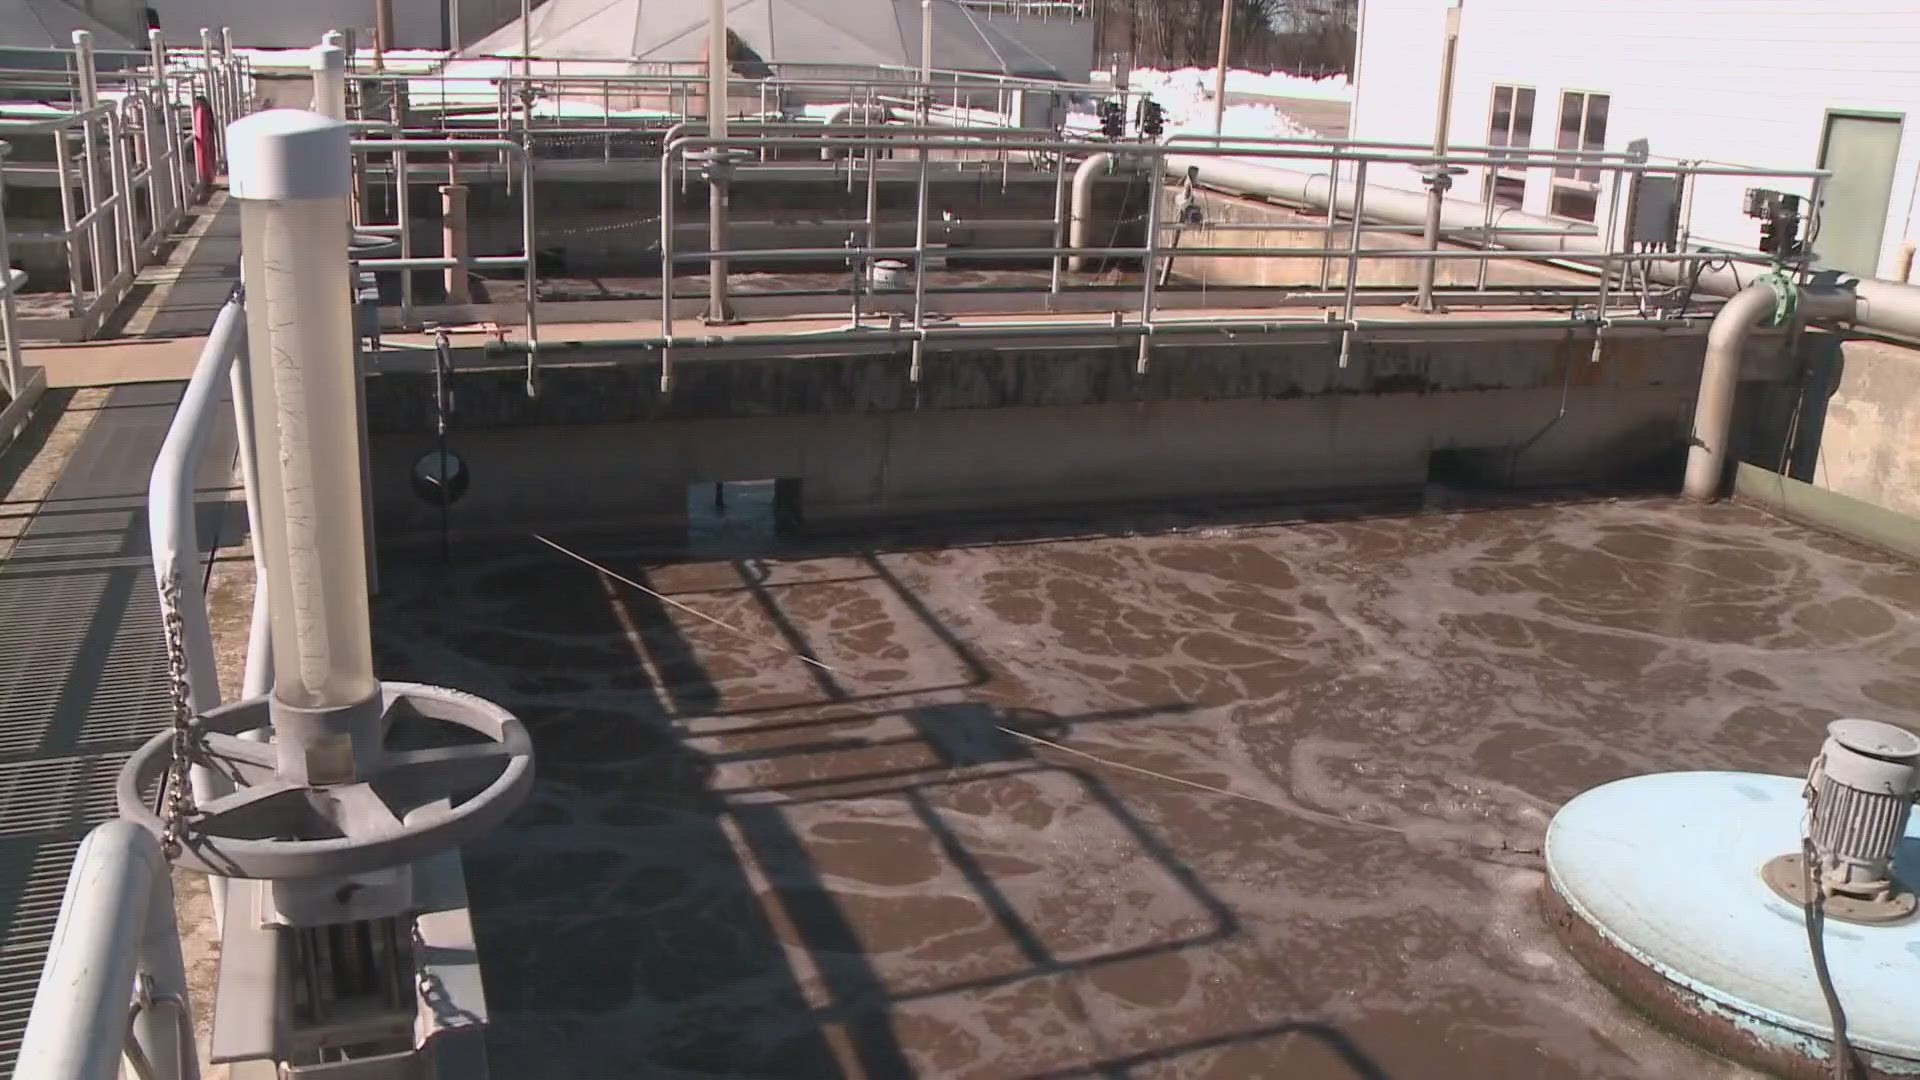 Tons of sludge are being shipped into Canada, with ratepayers expected to pick up the bill.